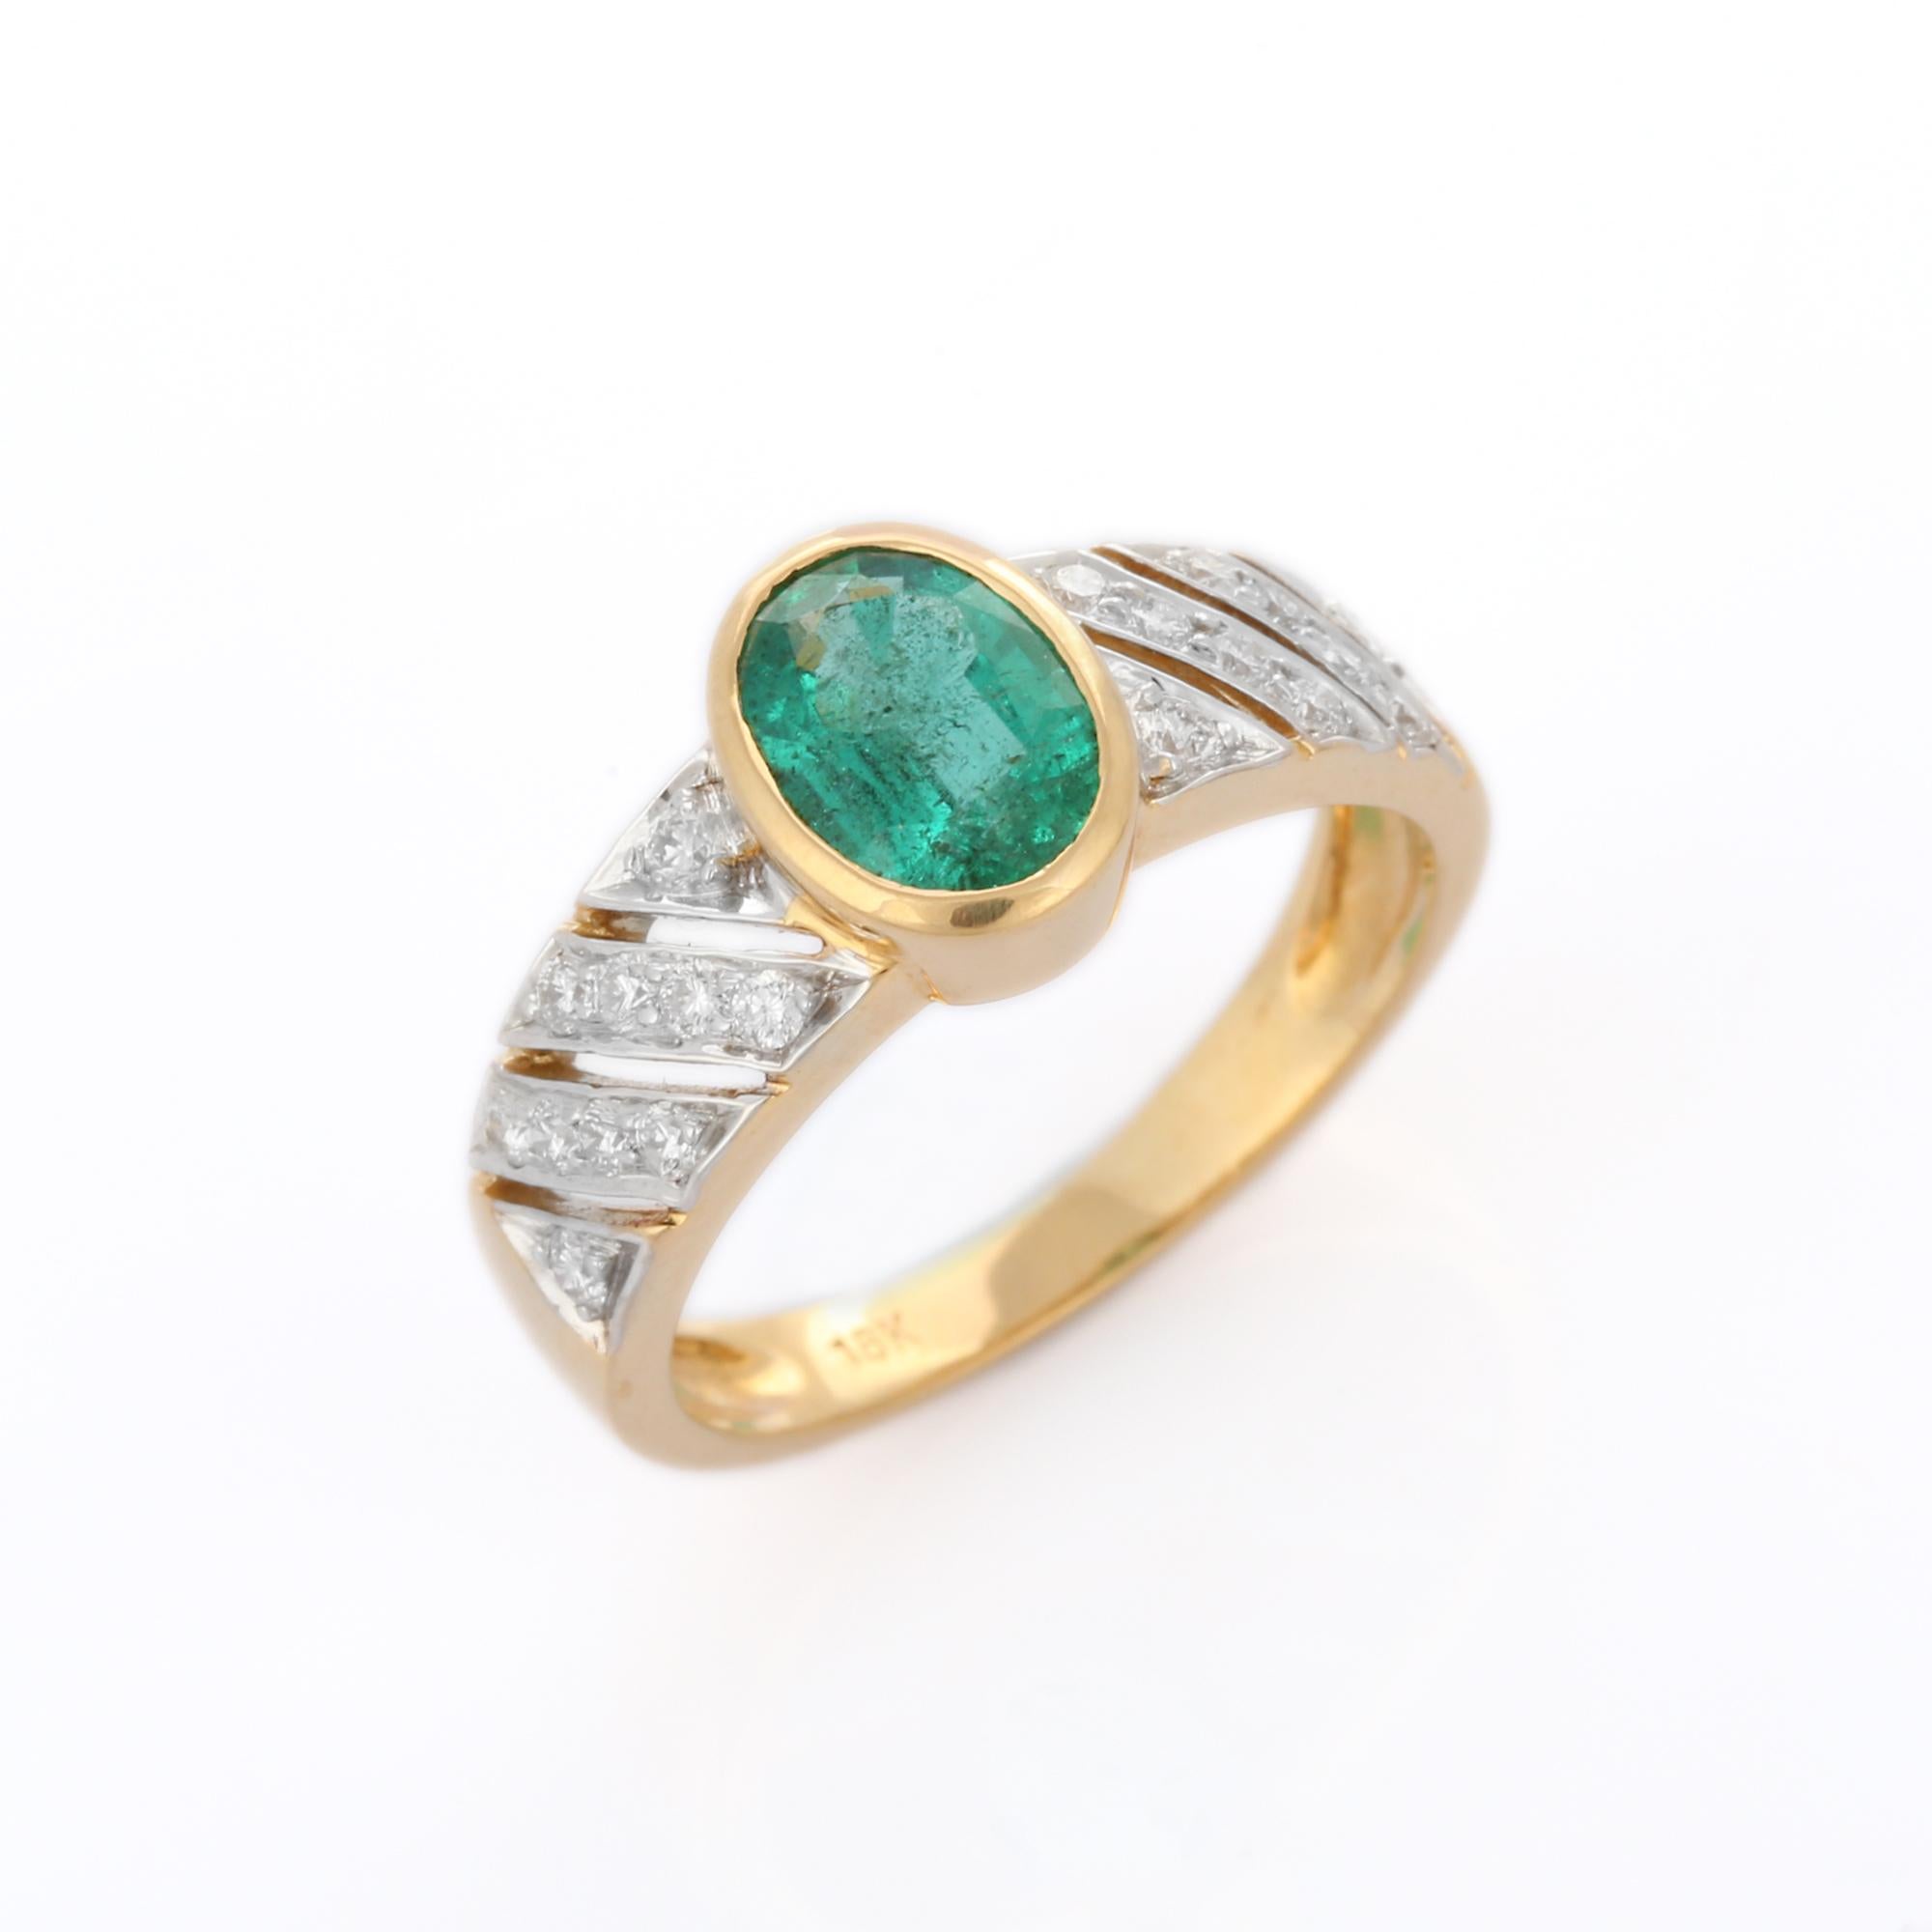 For Sale:  Exquisite 1.11 Ct Emerald Gemstone & Diamonds Engagement Ring in 18K Yellow Gold 2